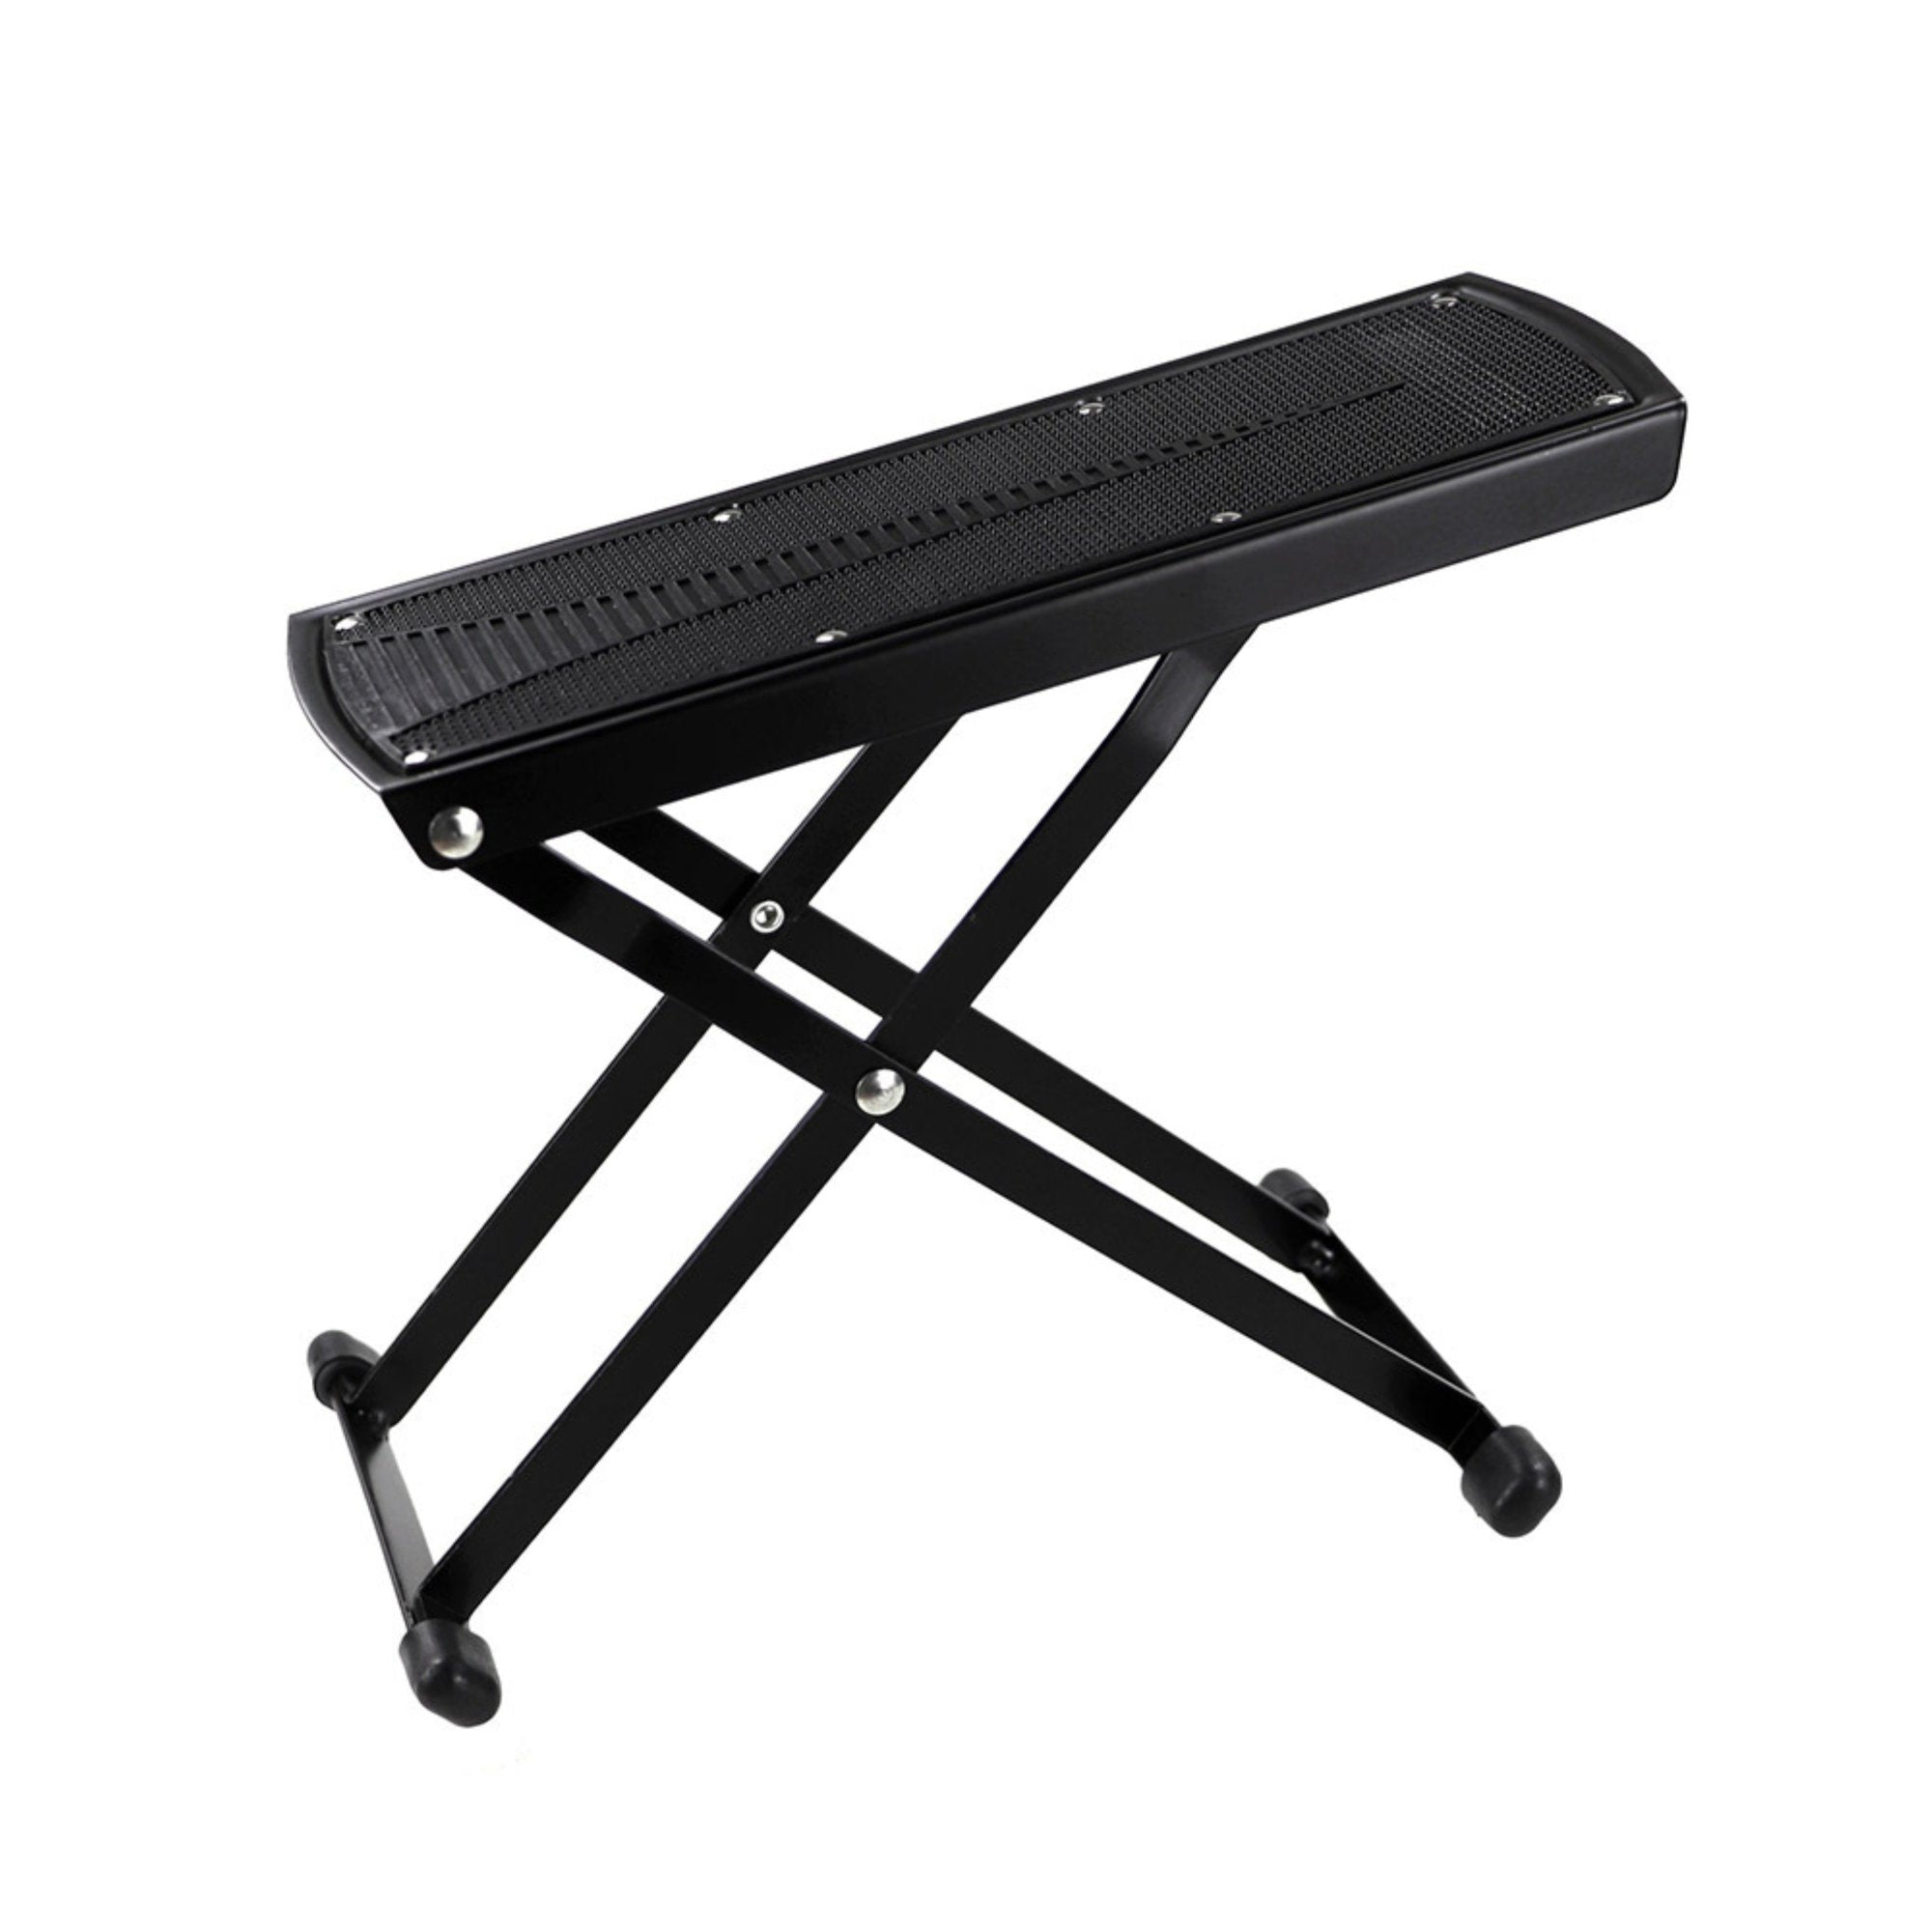 Alba Guitar Beads 6 Stage Foot Rest, Foot Stool for Classical guitar and for Flamenco guitar.